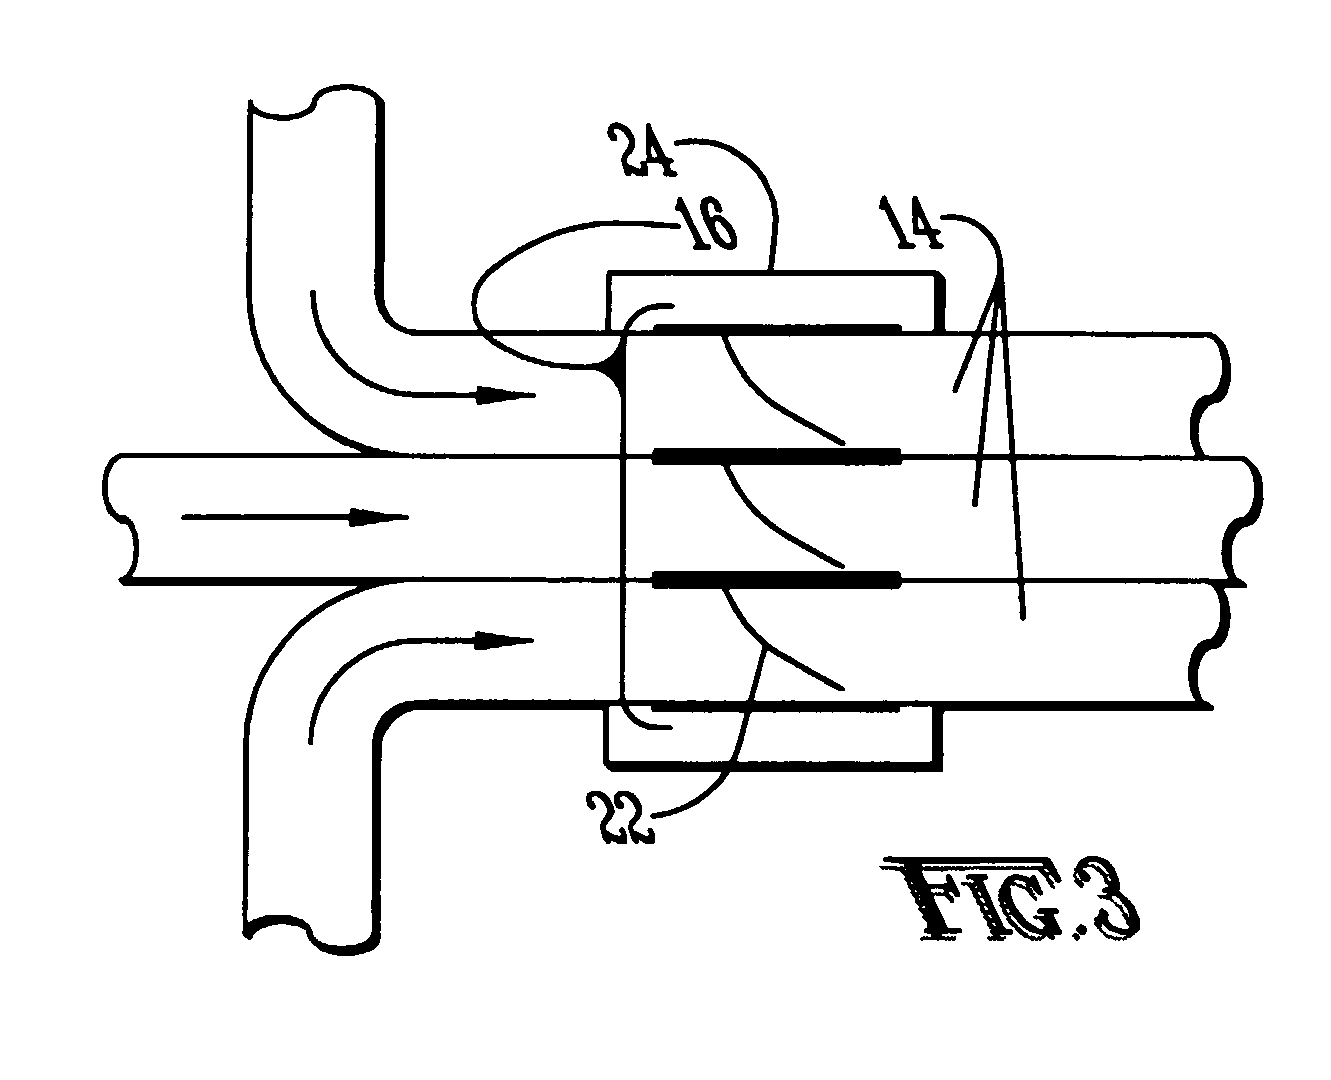 Temperature conditioning system with thermo-responsive valves